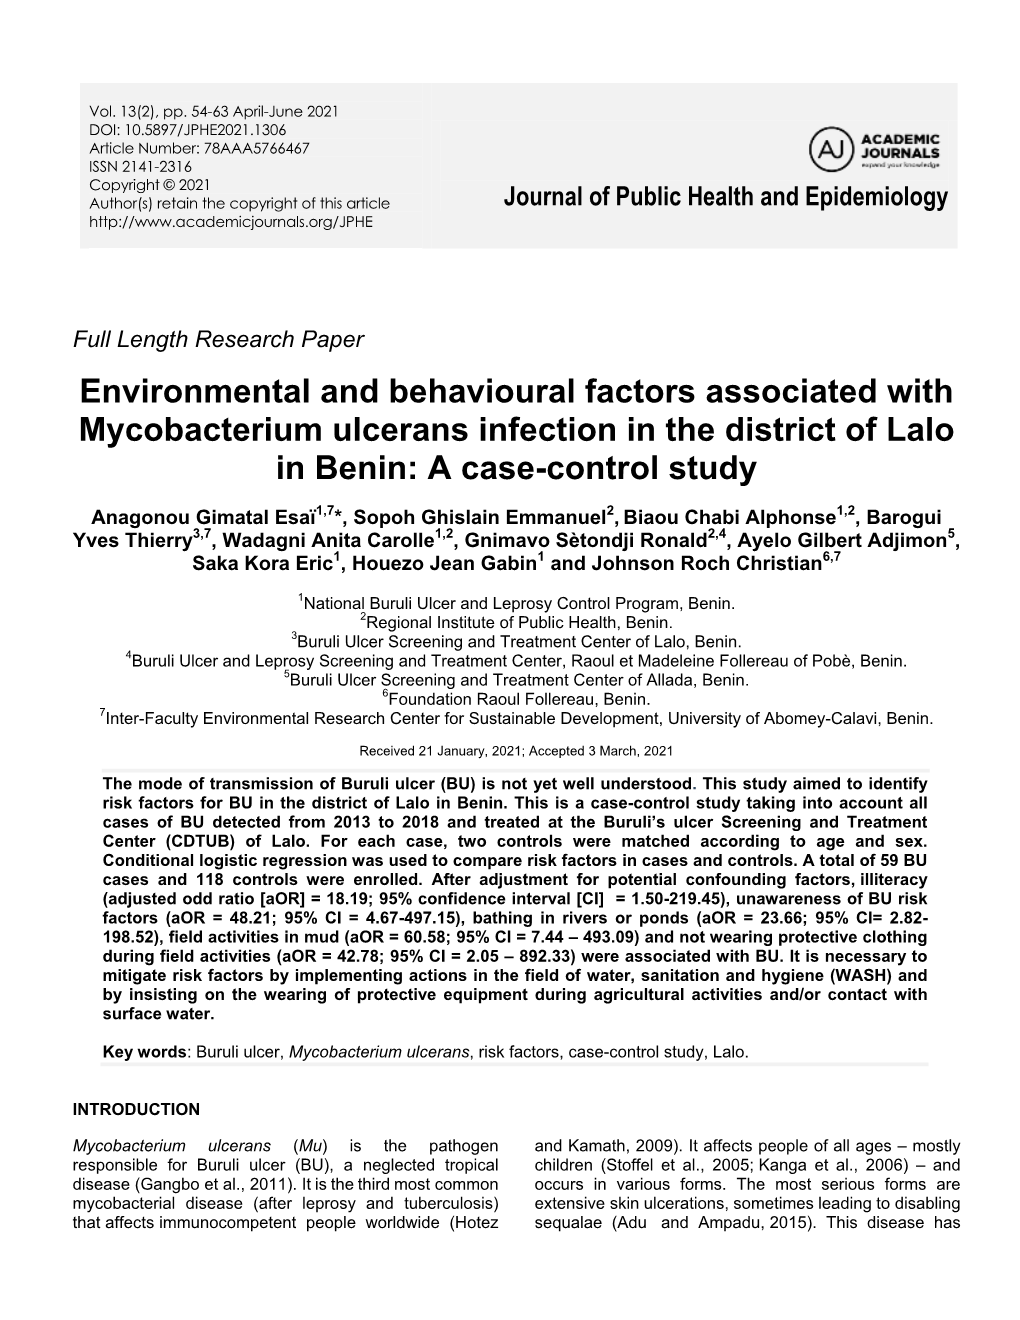 Environmental and Behavioural Factors Associated with Mycobacterium Ulcerans Infection in the District of Lalo in Benin: a Case-Control Study